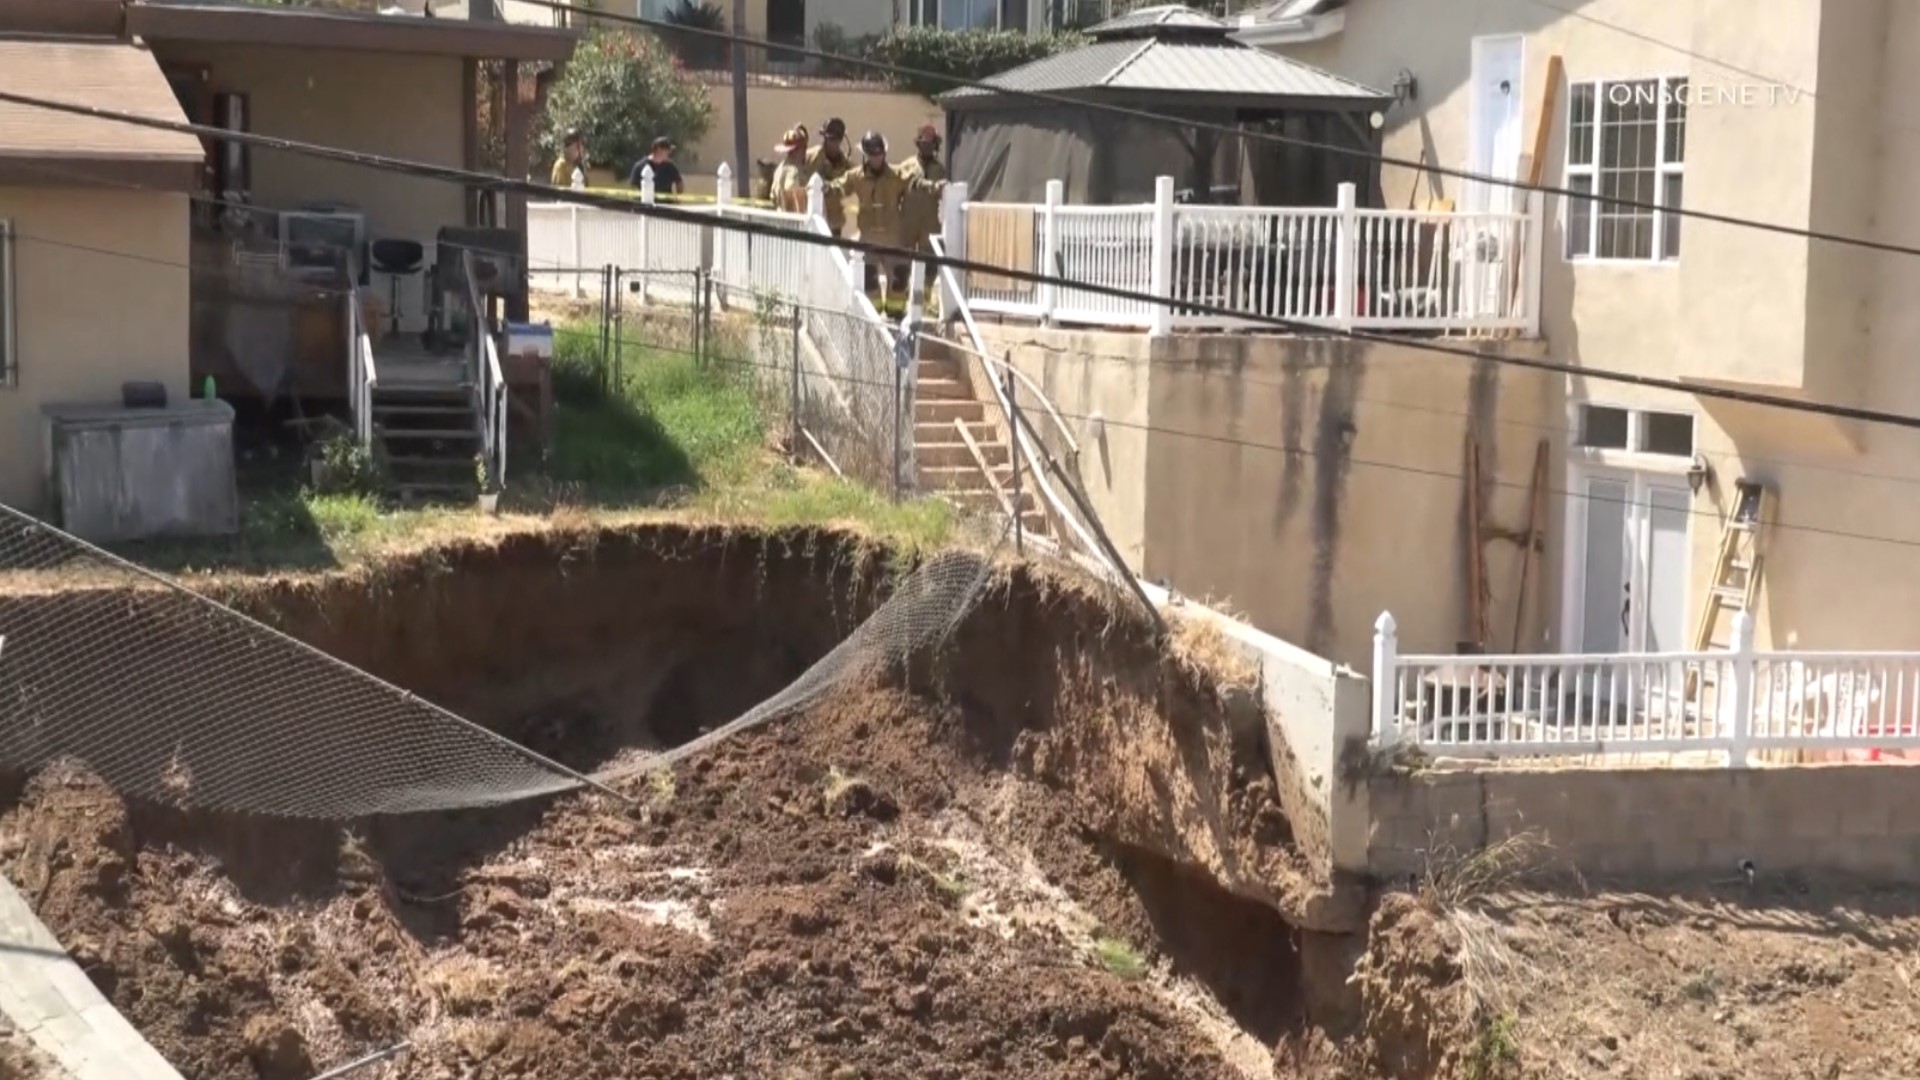 The mudslide was started by a water leak caused the ground and a retaining wall to collapse.